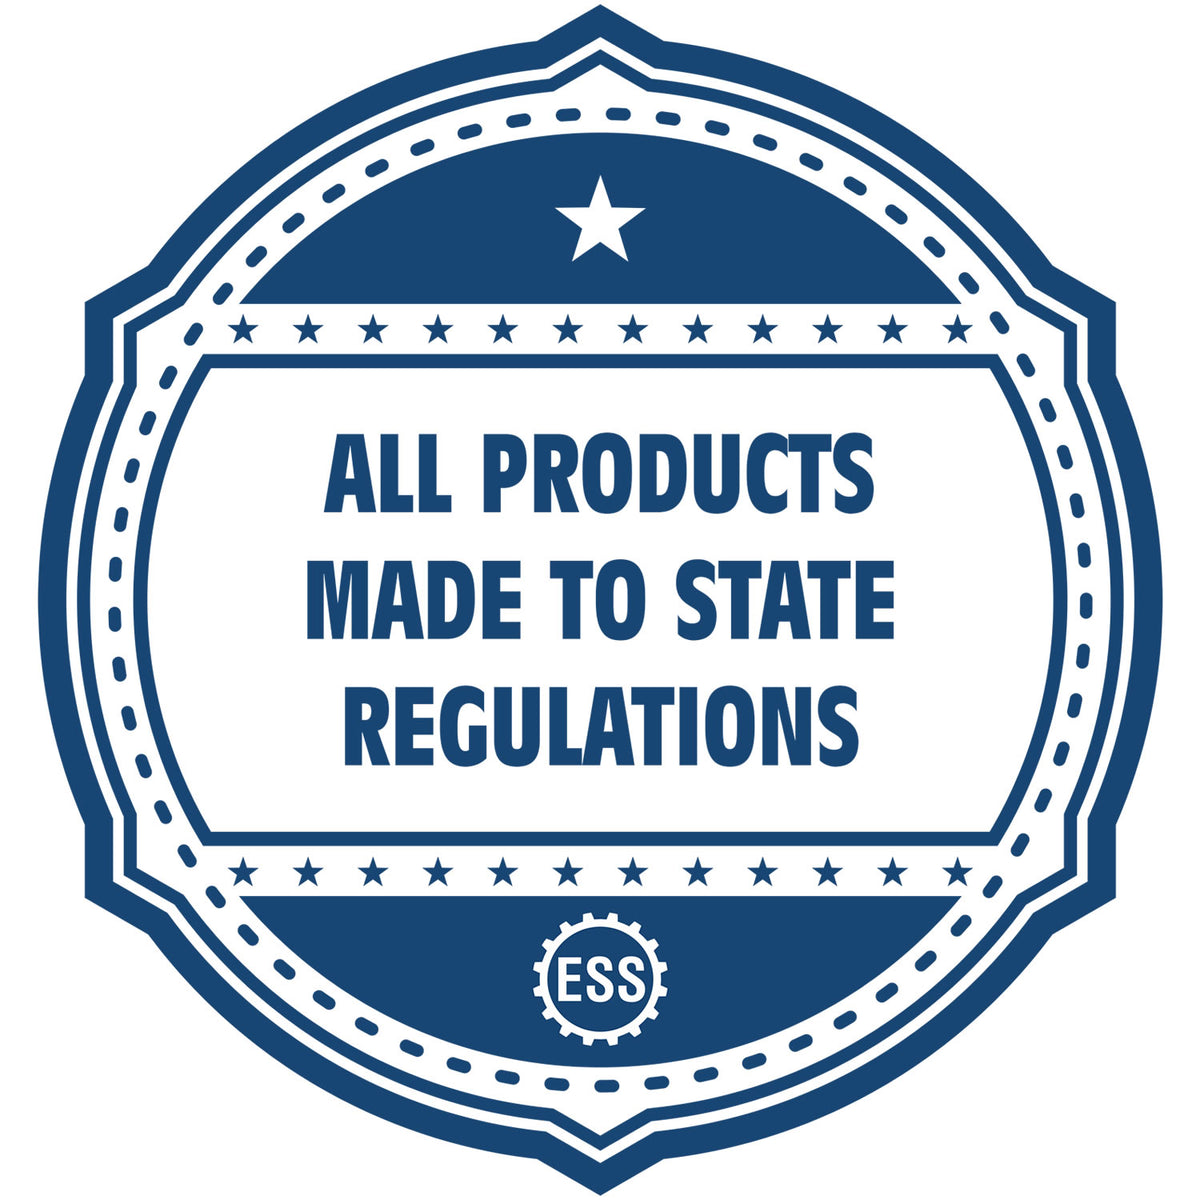 An icon or badge element for the Rhode Island Desk Architect Embossing Seal showing that this product is made in compliance with state regulations.